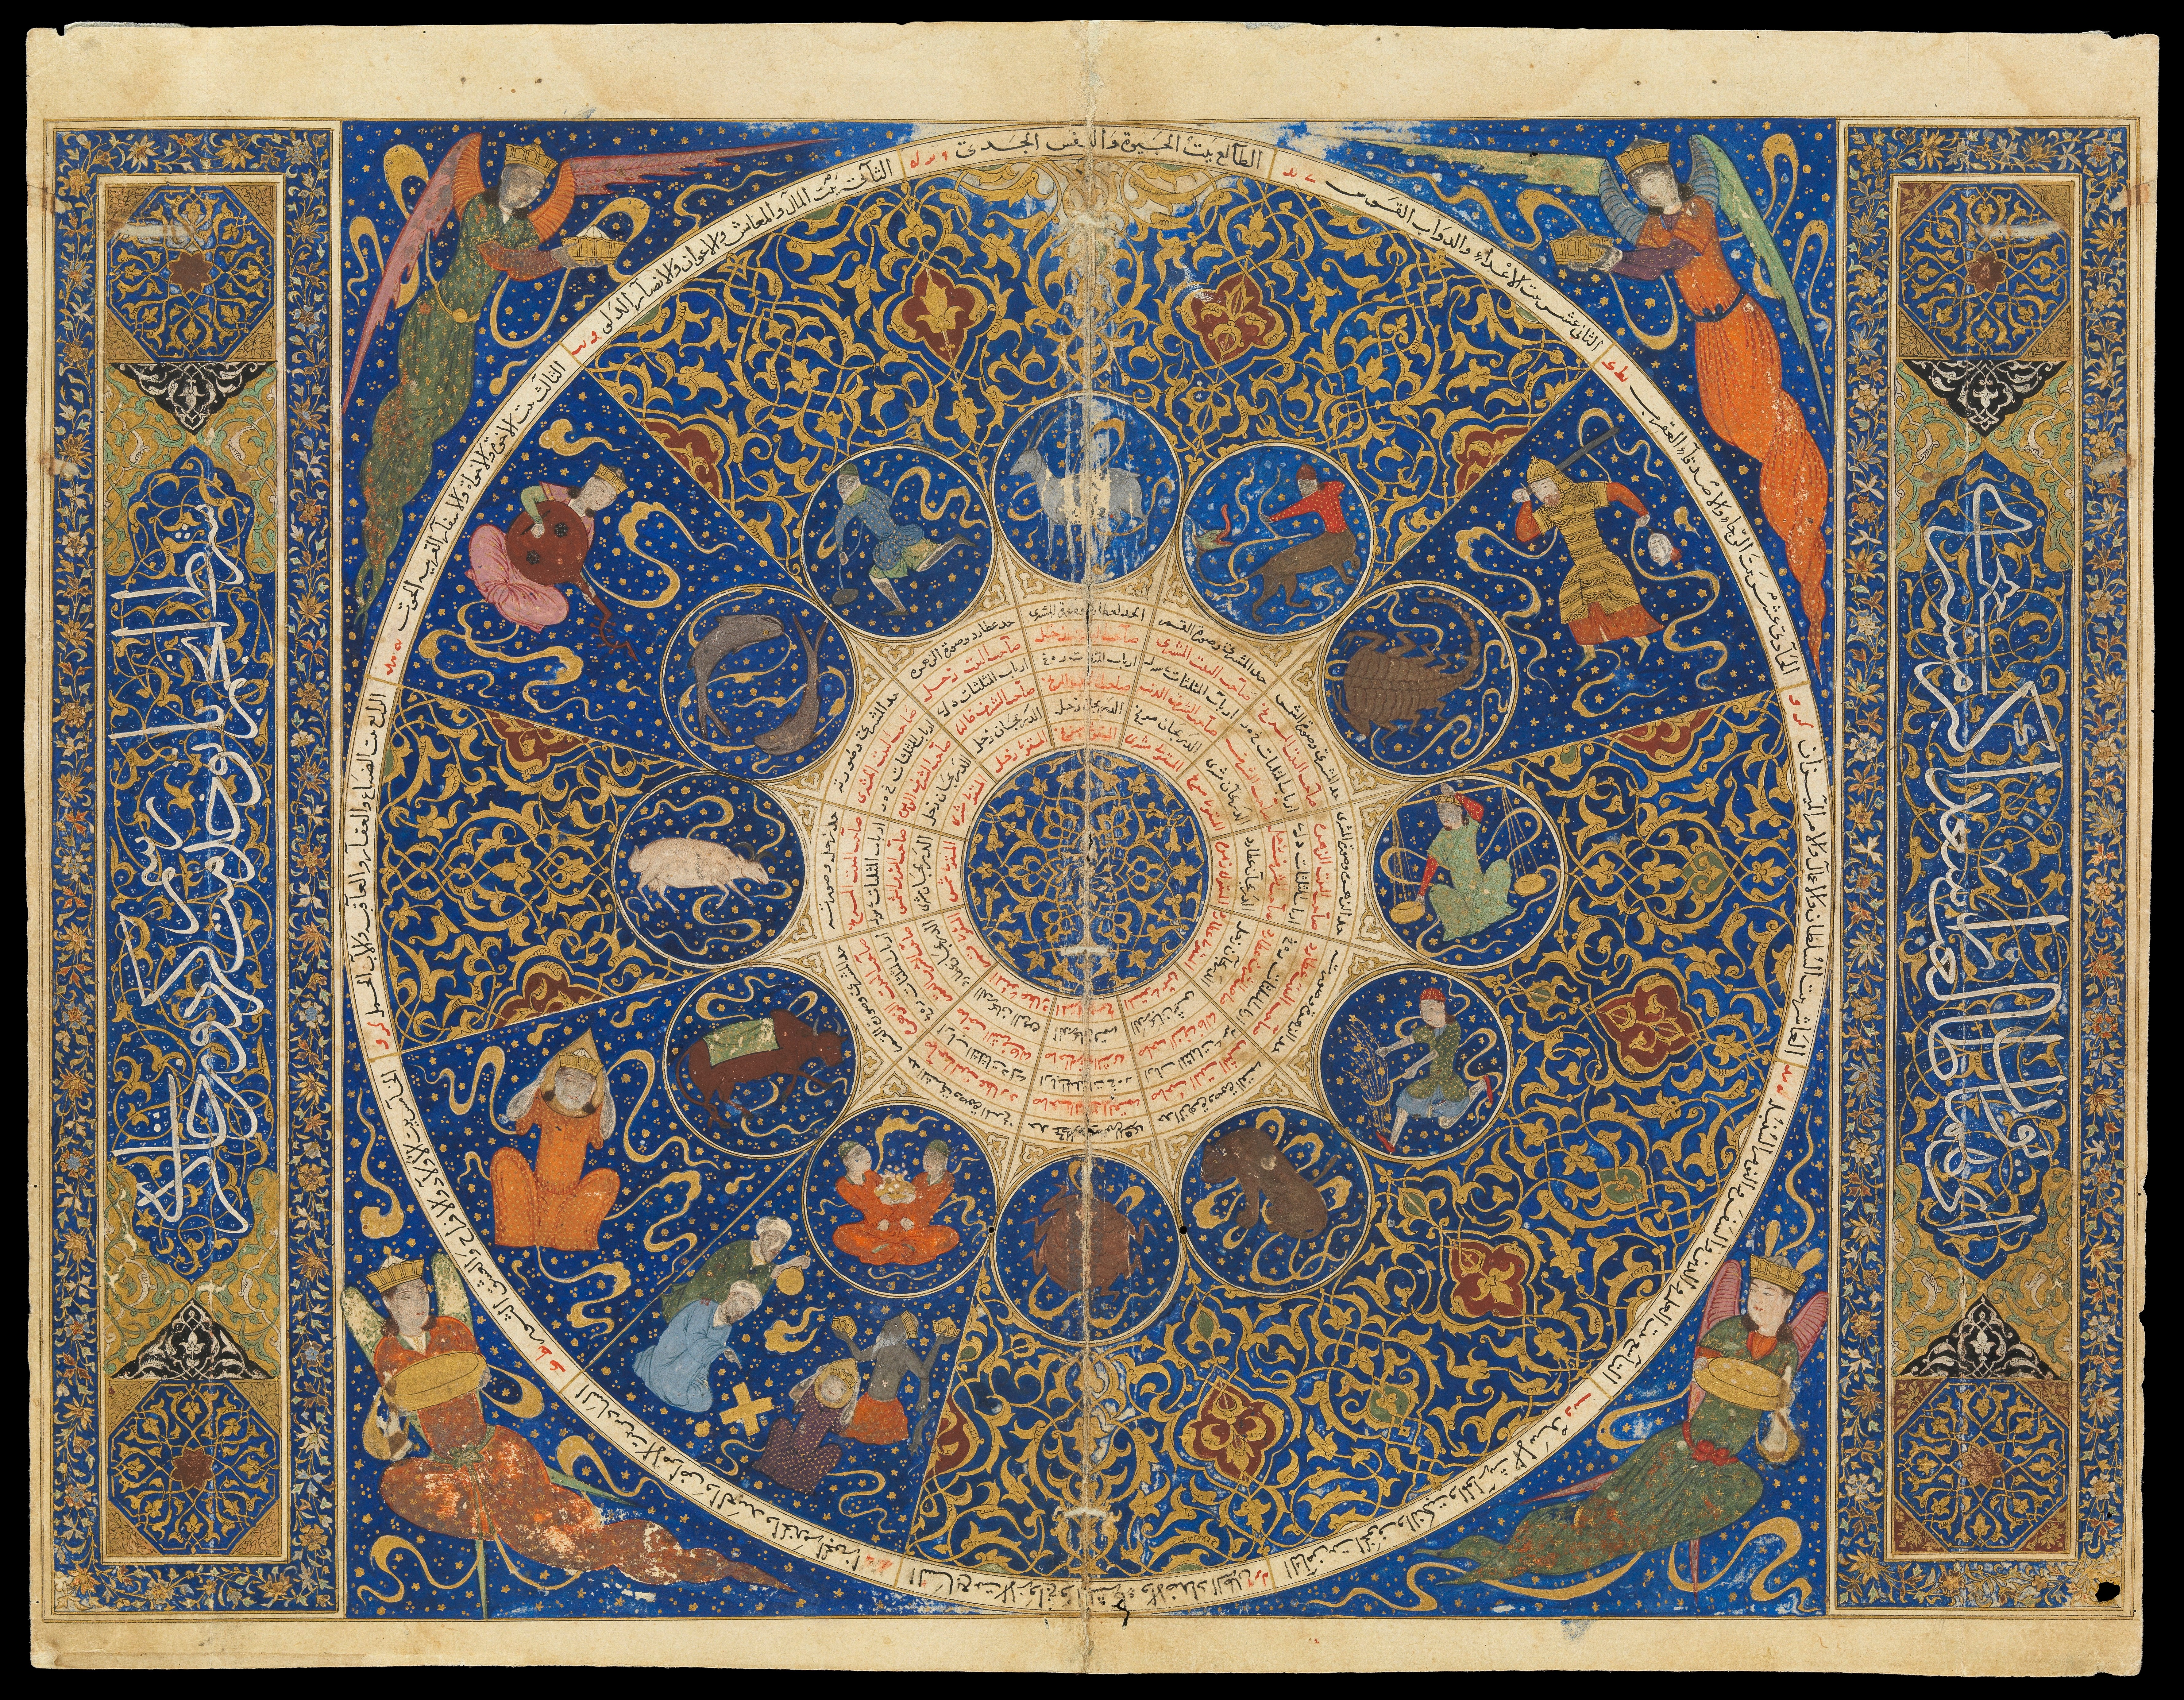 Horoscope of Prince Iskandar, grandson of Tamerlane, the Turco-Mongol conqueror. This horoscope shows the positions of the heavens at the moment of Iskandar's birth on 25th April 1384. Iran, 1411.jpg